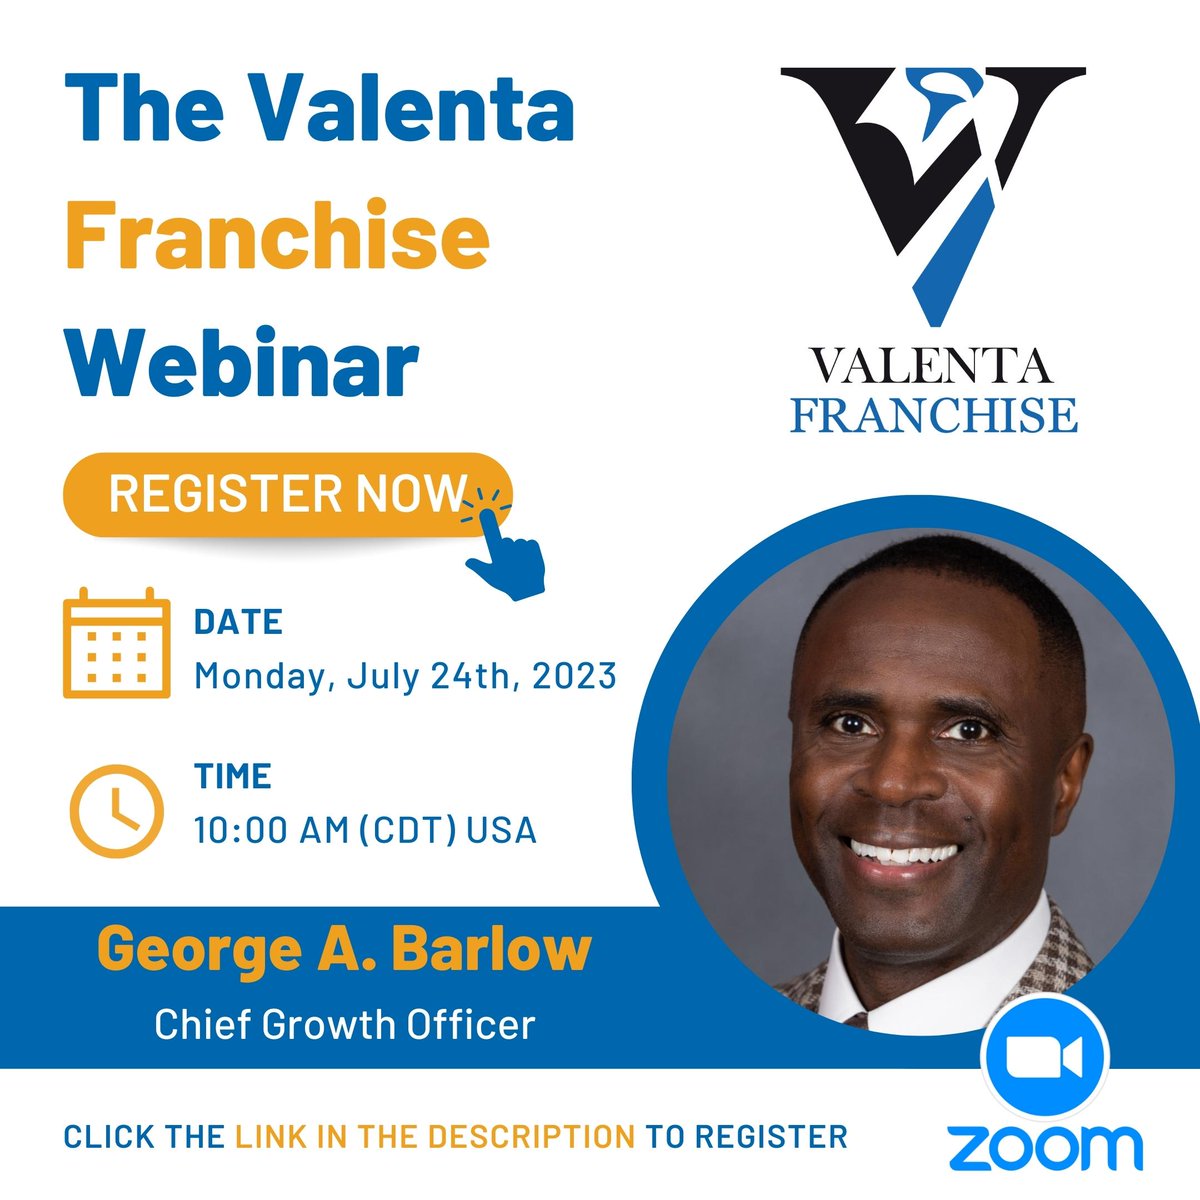 🤝Partner with Valenta: A Winning Opportunity for #FranchiseBrokers! Learn more about Valenta's unique #Franchisemodel and the benefits of partnering with Valenta Franchise on July 24th in our webinar series. Register now: zurl.co/cyPv 
#franchiseopportunity #USA